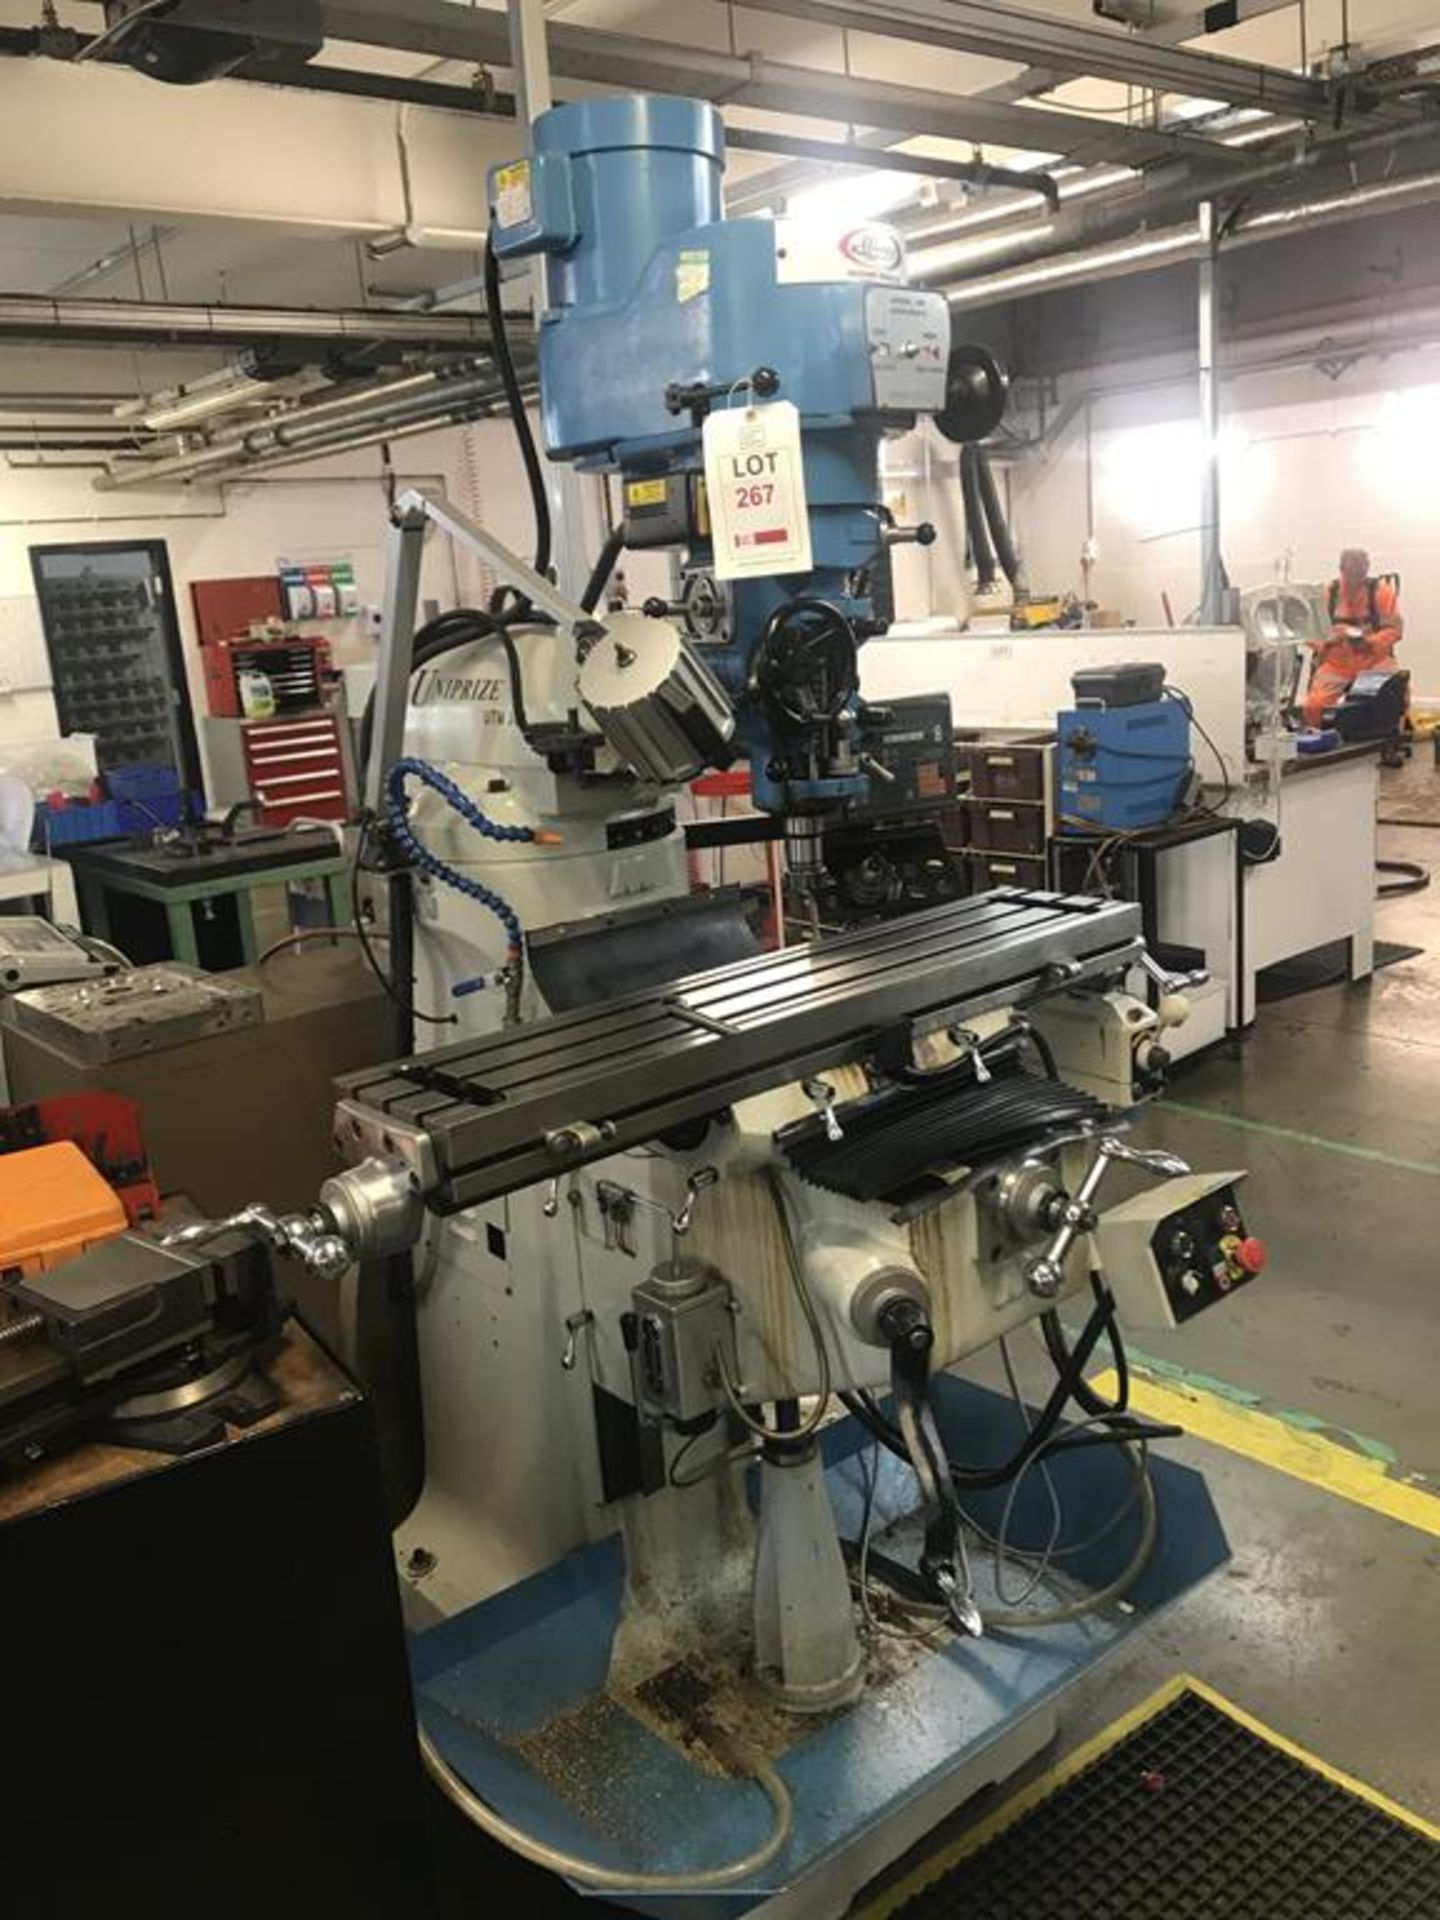 Uniprize UTM 3VS turret milling machine, serial No 6313 (2005) with EMC202M digital read out, 1065mm